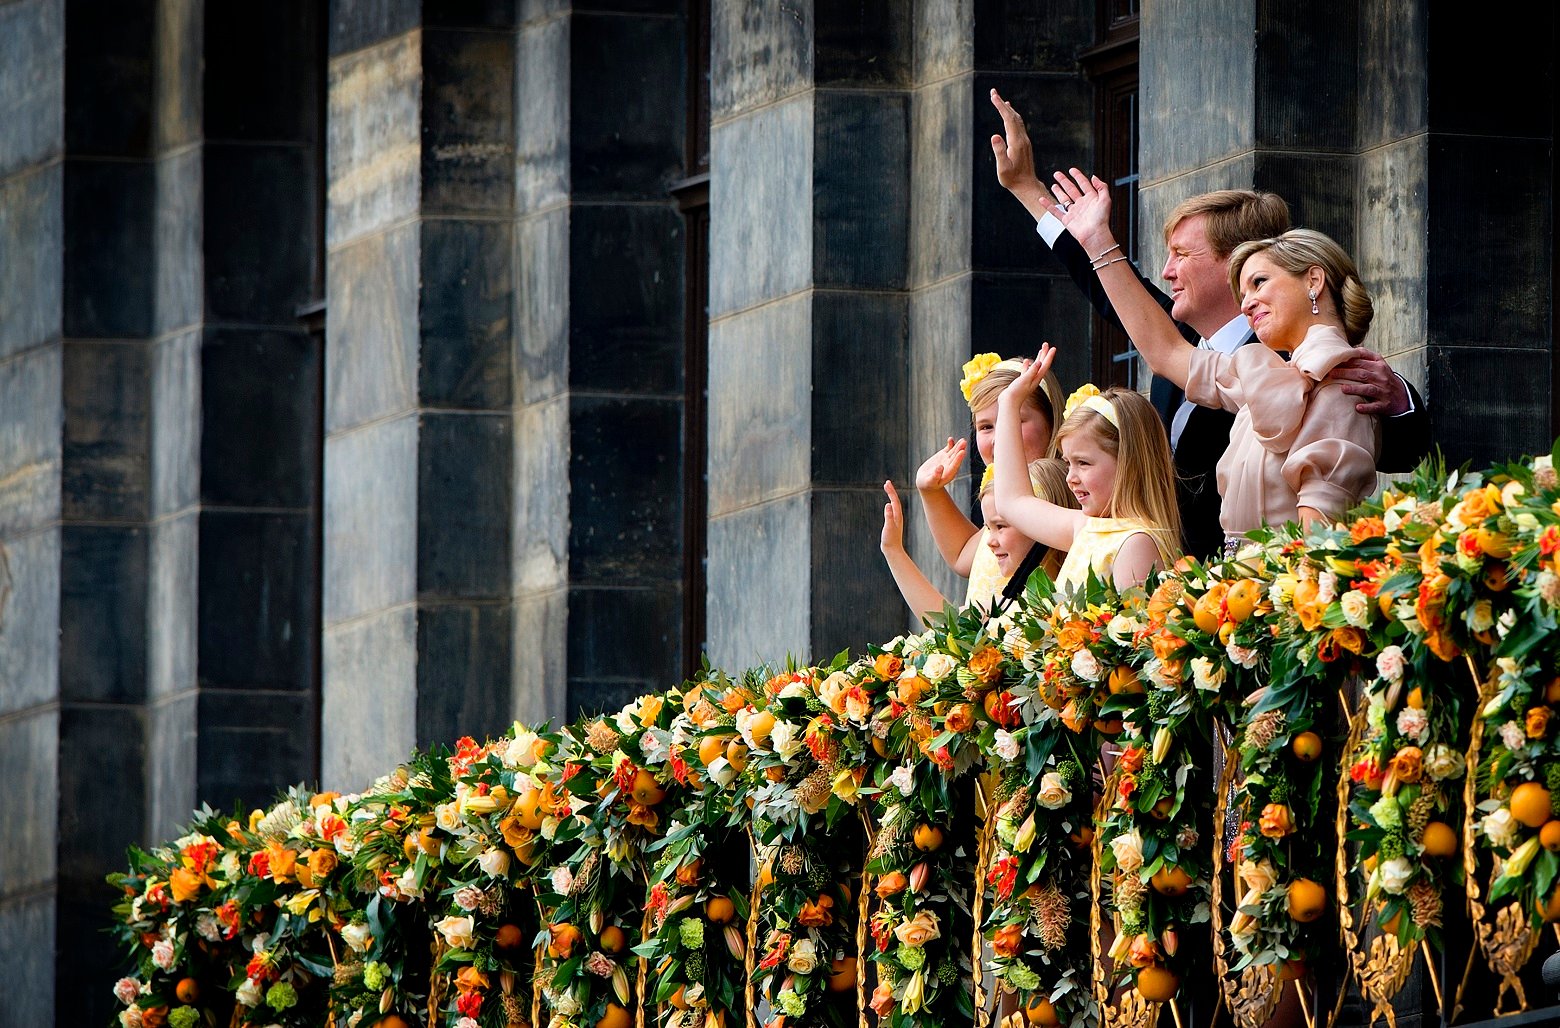 Dutch King Willem-Alexander and Queen Maxima appear on the balcony of the Royal Palace with their children, from left: Catharina-Amalia, Ariane, and Alexia in Amsterdam, The Netherlands, Tuesday April 30, 2013. Around a million people are expected to descend on the Dutch capital for a huge street party to celebrate the first new Dutch monarch in 33 years. (AP Photo/Robin Utrecht, pool)